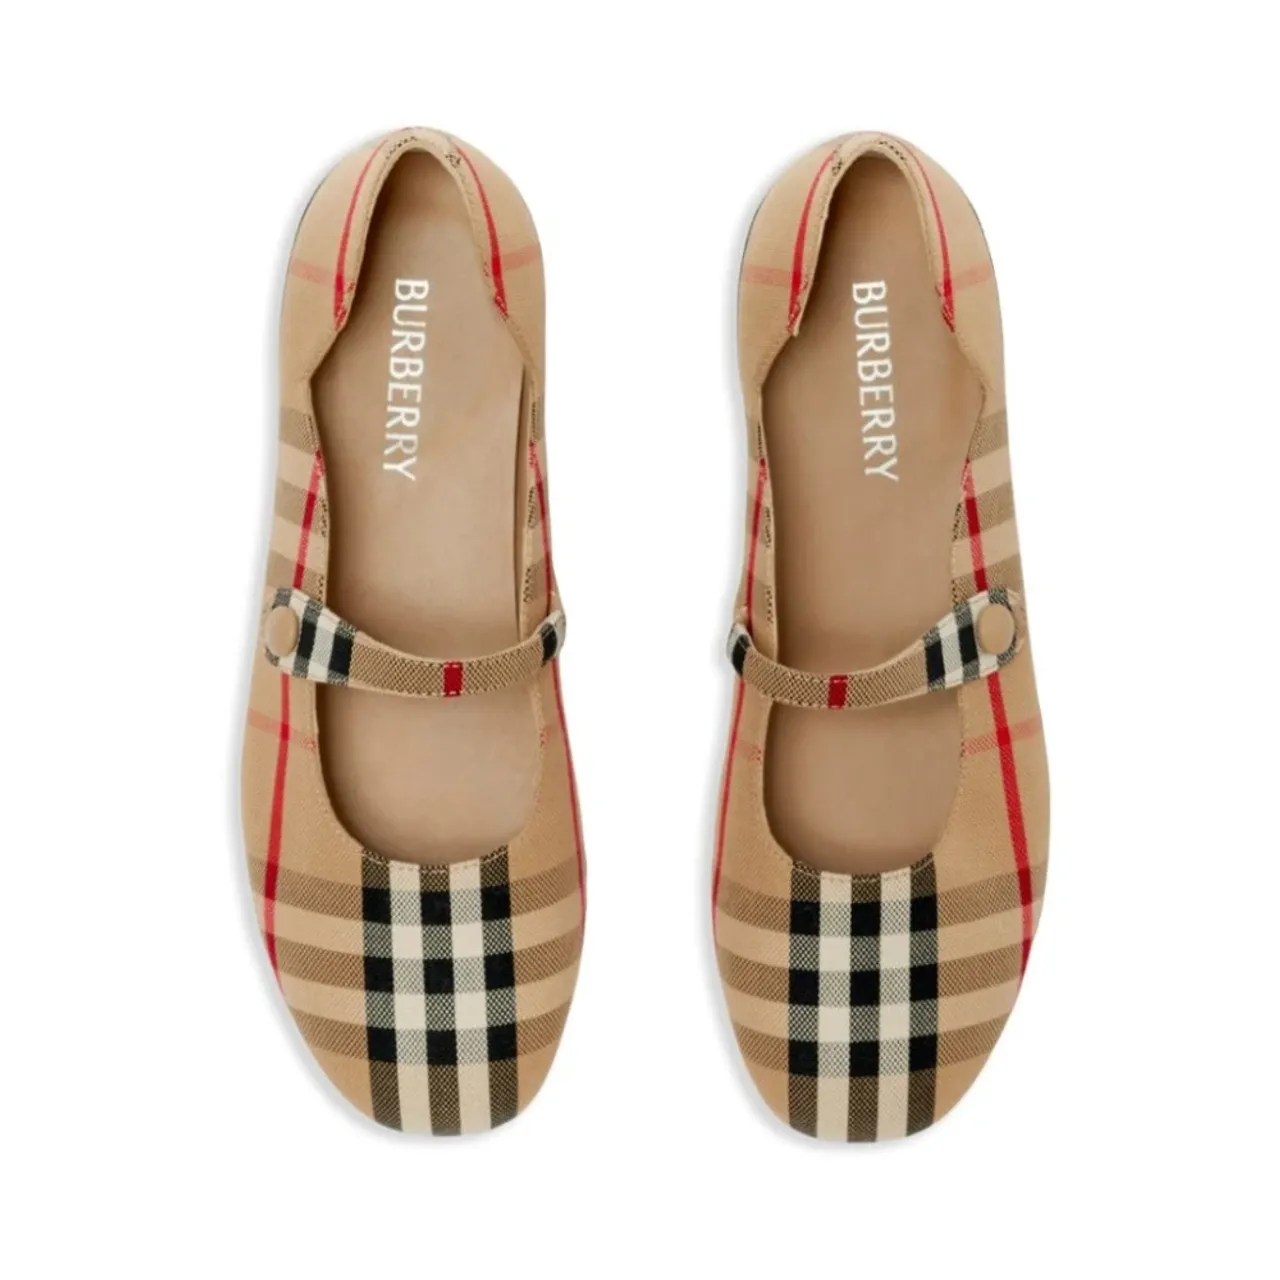 Burberry , Kids Flat Shoes in Beige ,Multicolor female, Sizes: